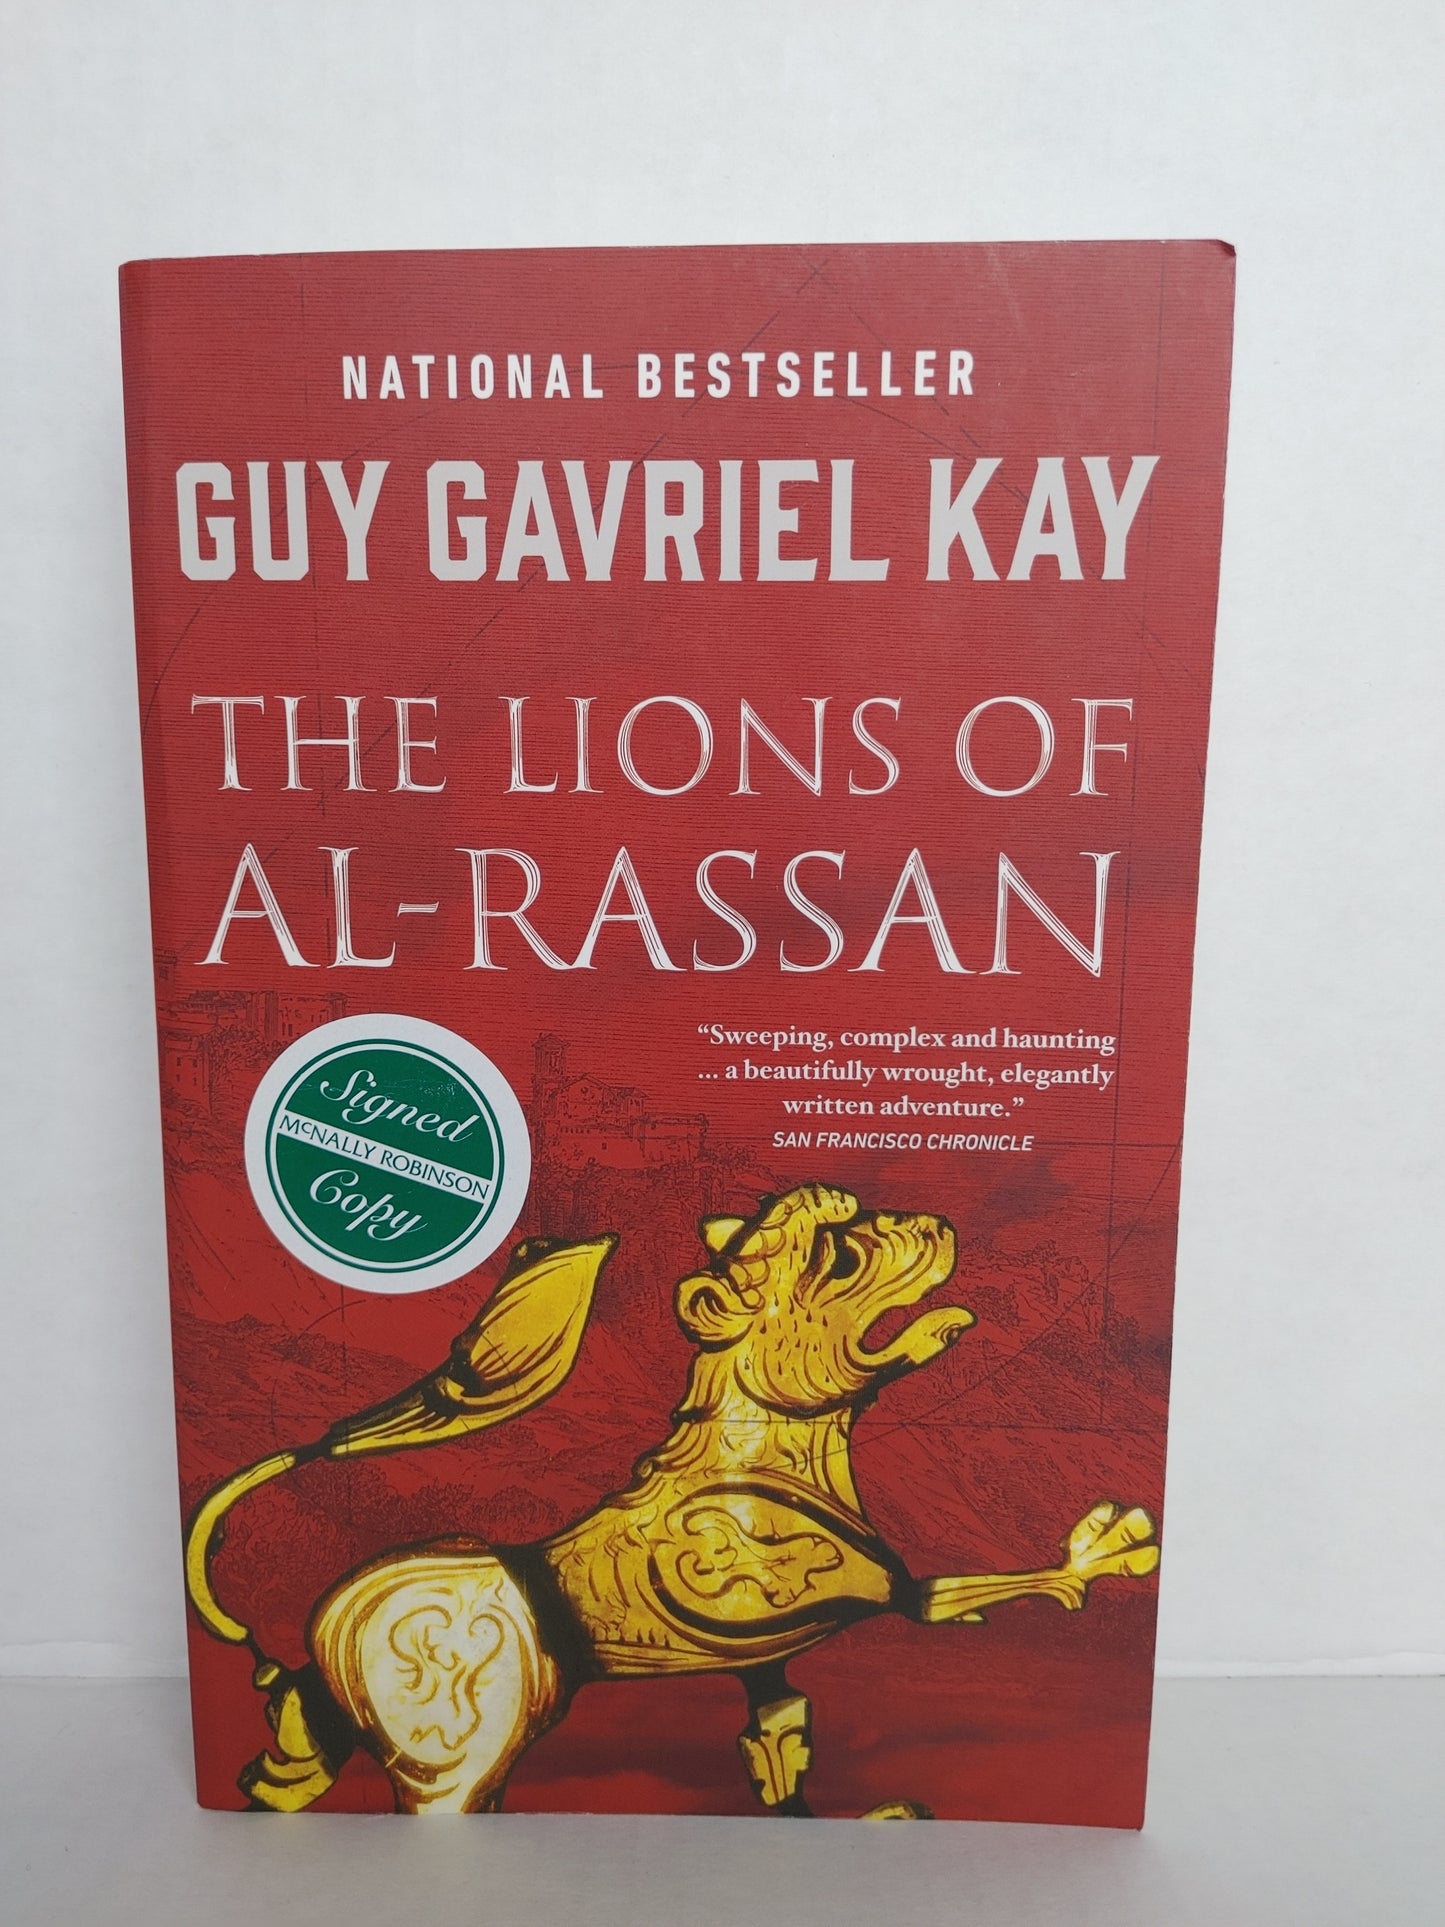 The Lions of Al-Rassan (Signed Copy)